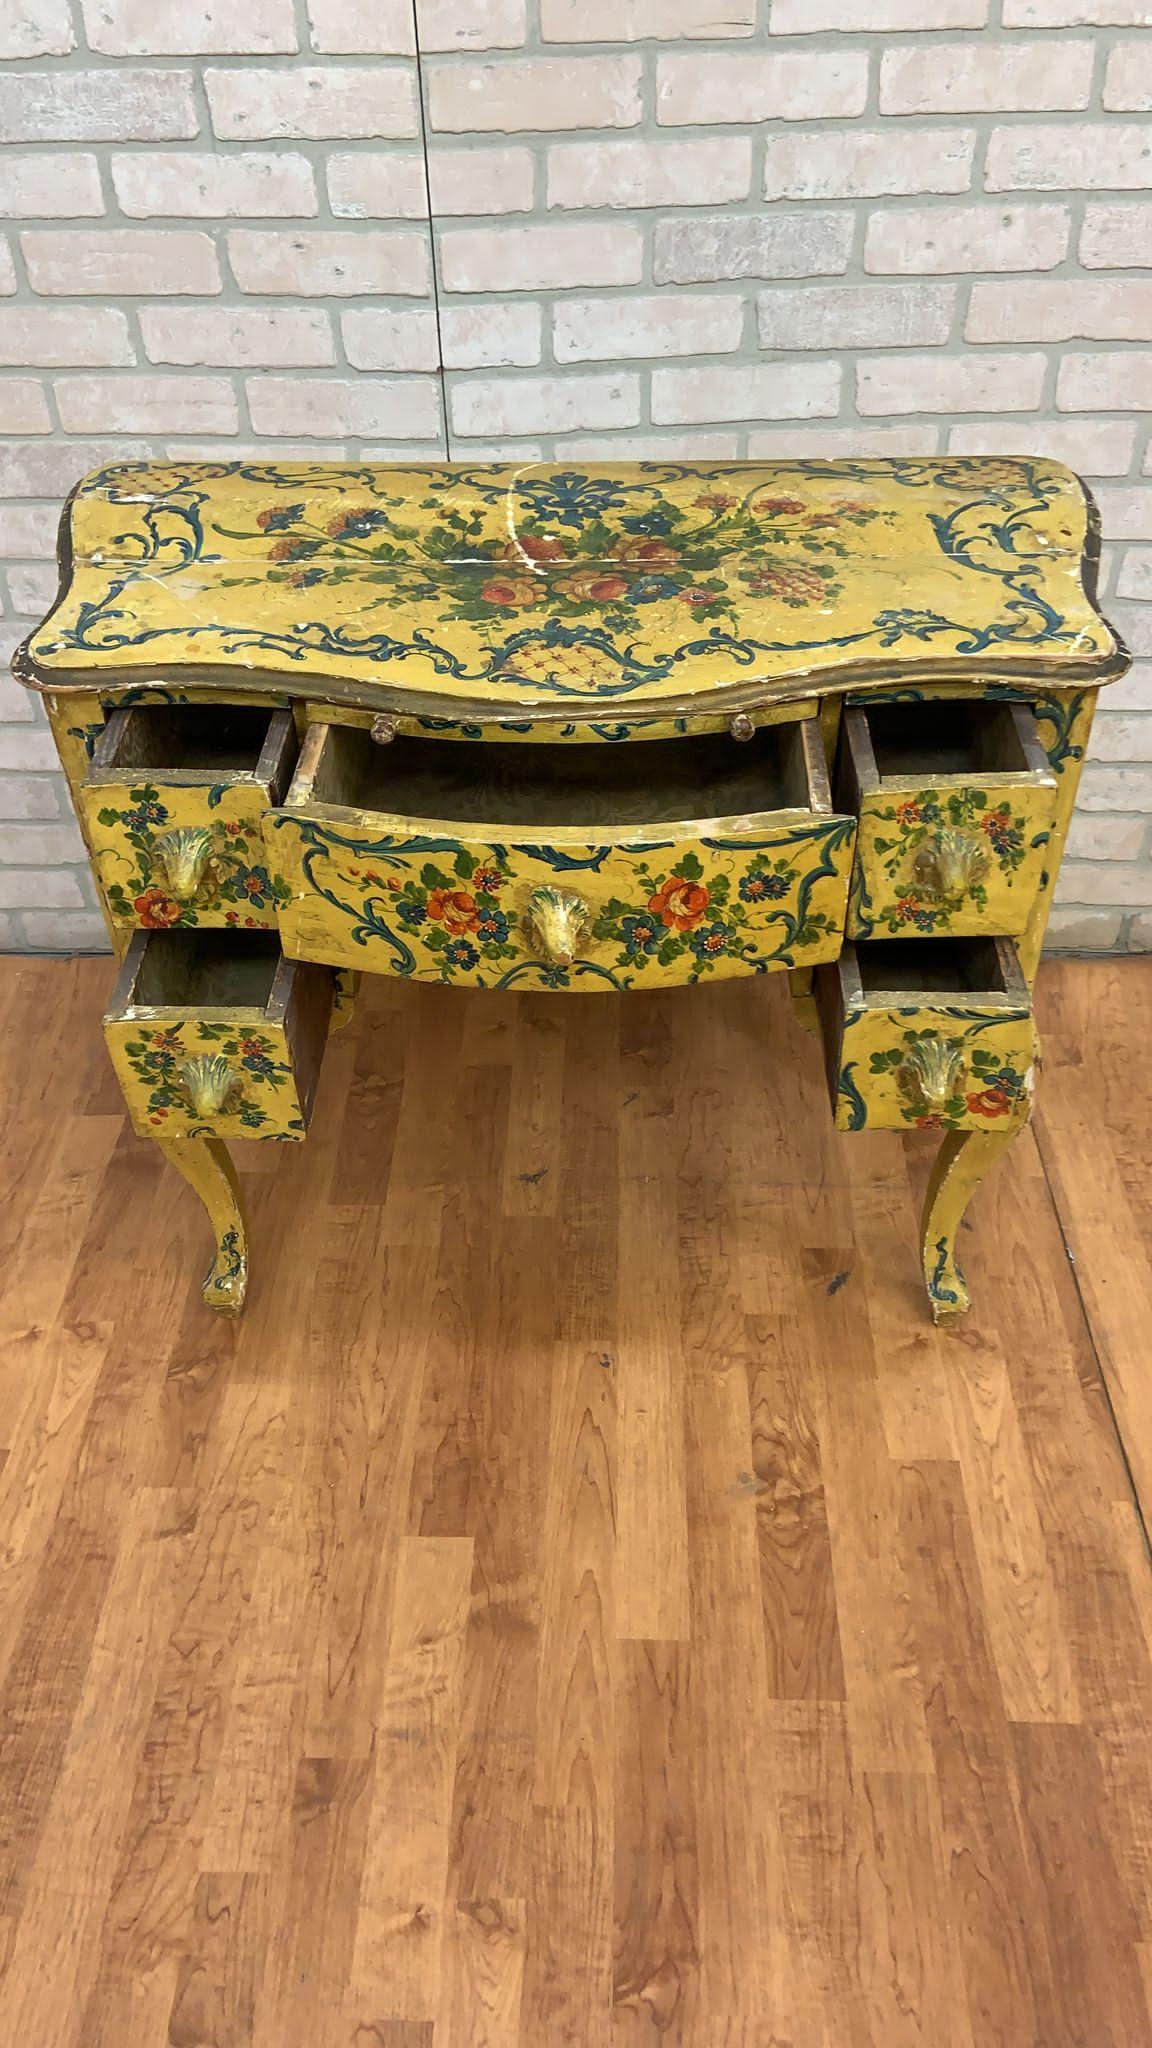 Antique Rococo Style Venetian Hand Painted Vanity Desk & Side Tables, Set of 3 For Sale 1